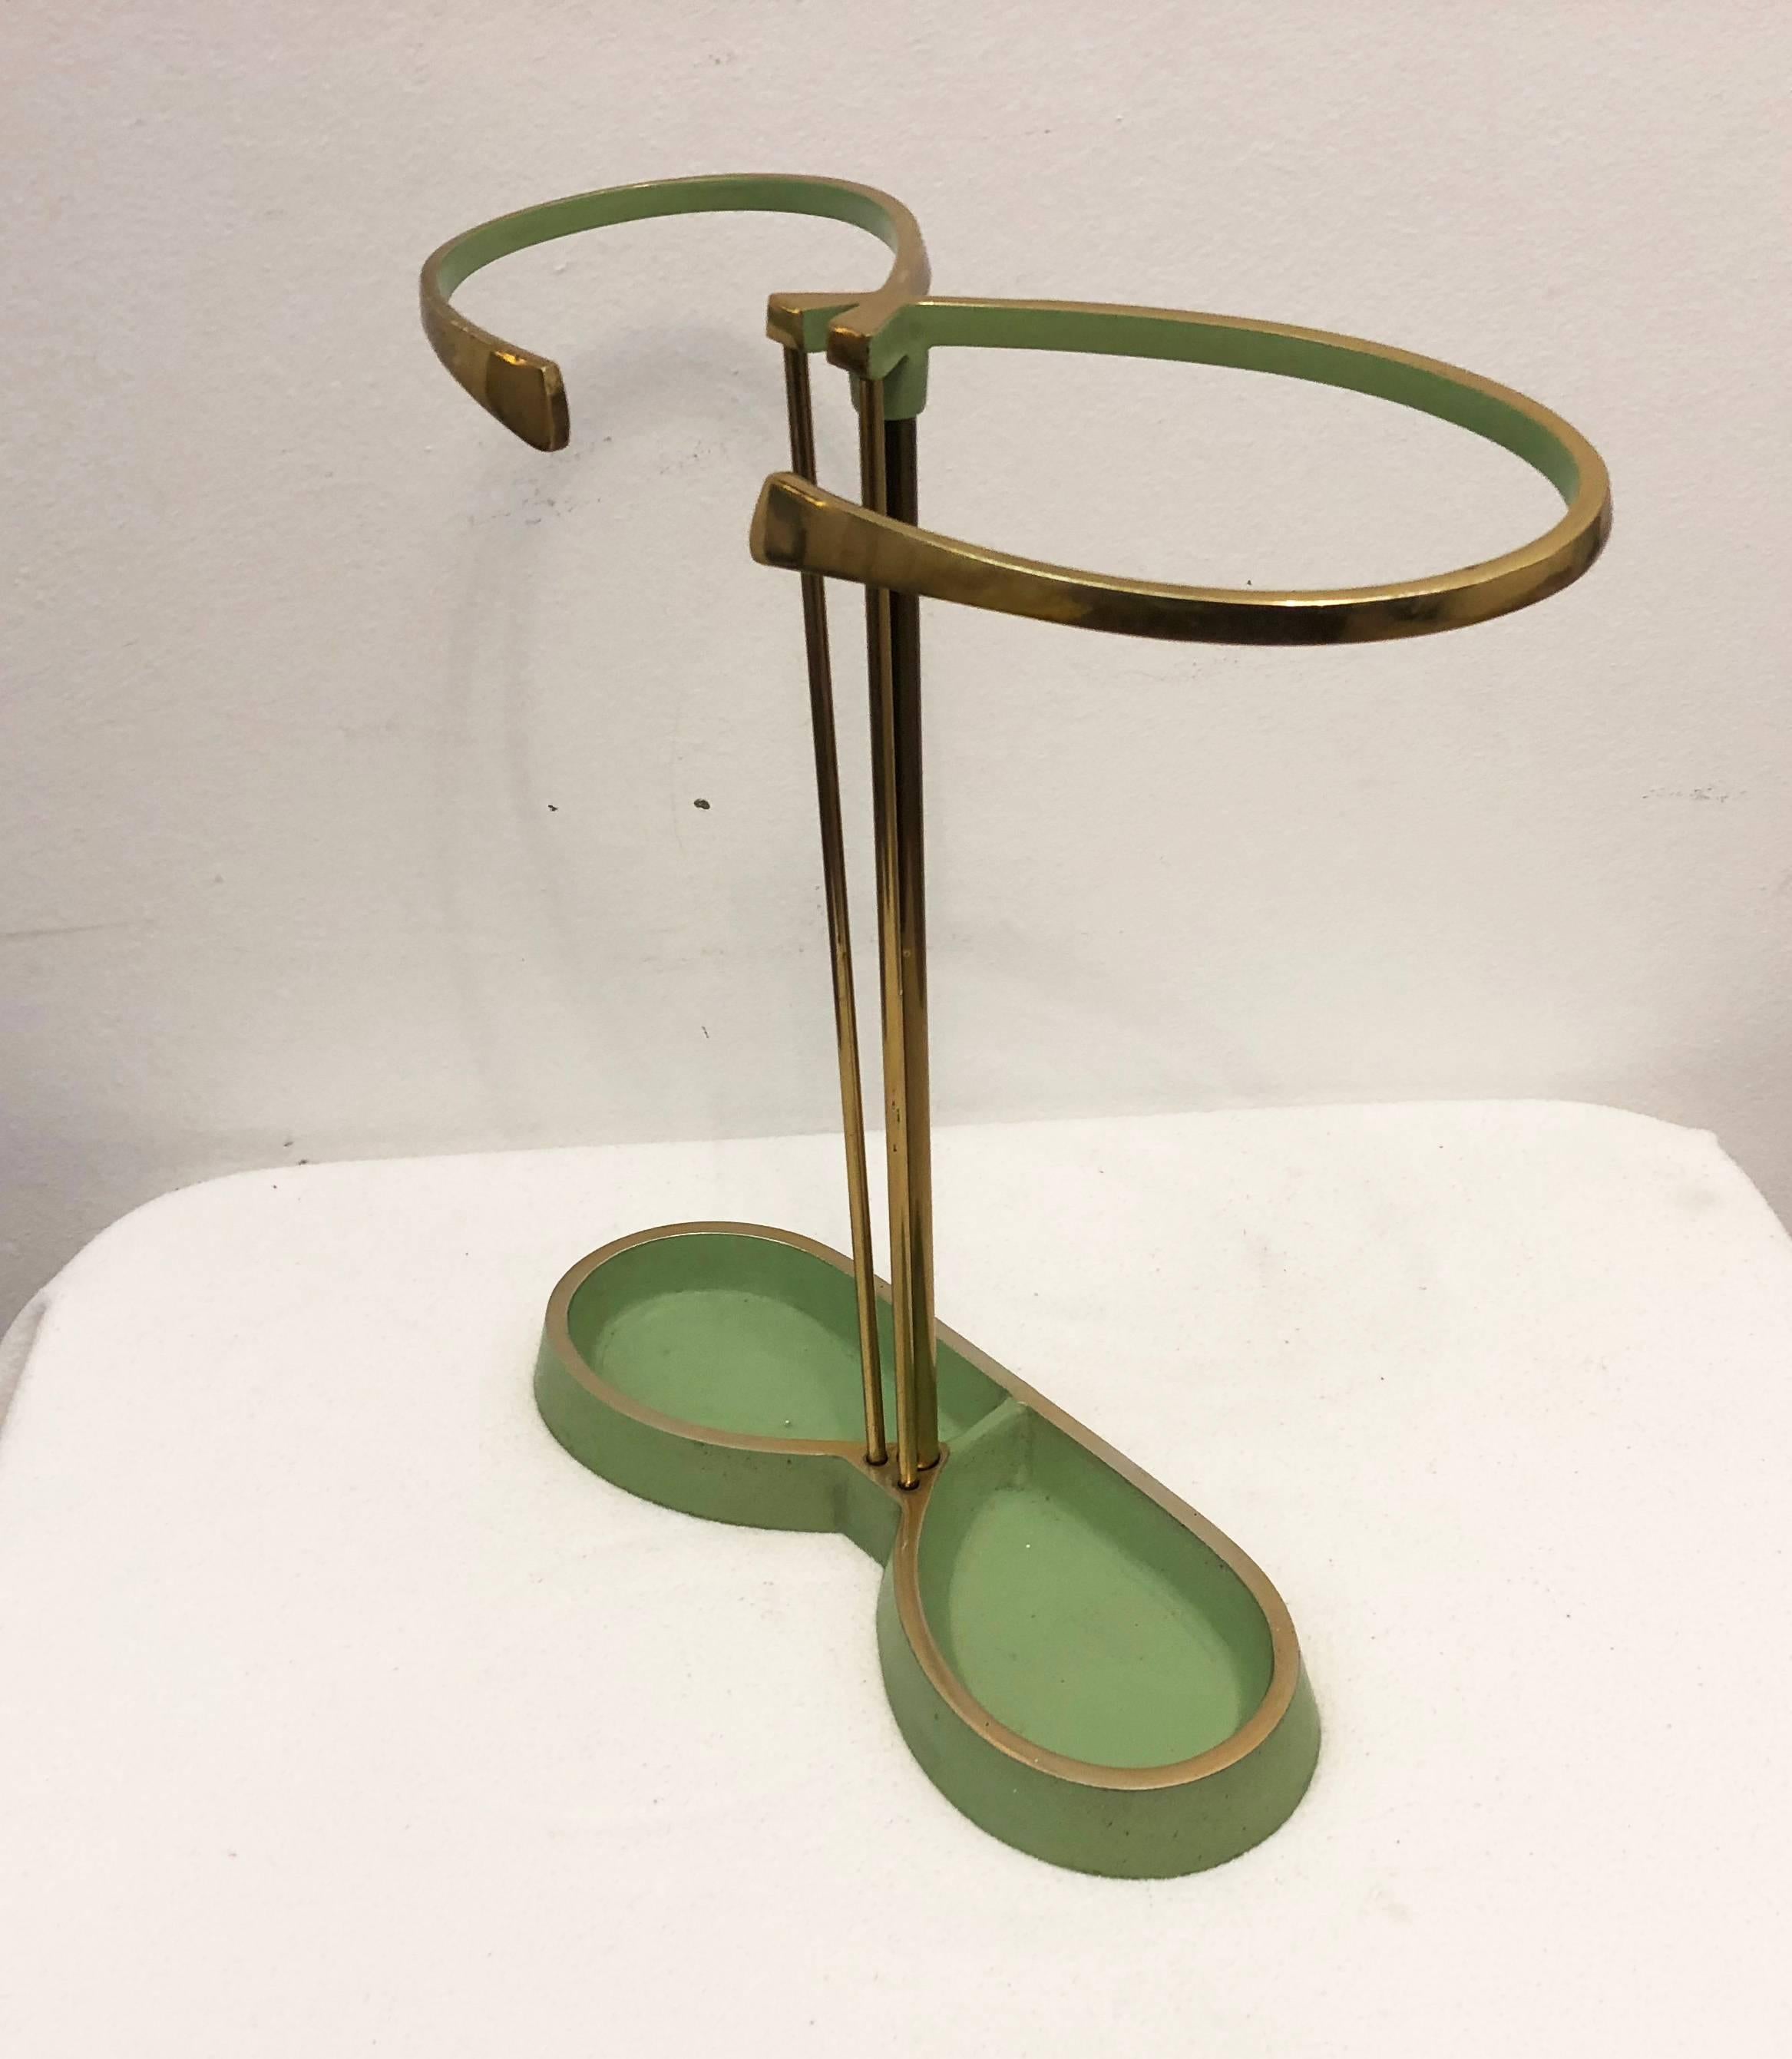 Mid-Century brass/aluminum partially green painted umbrella stand from the 1950s.